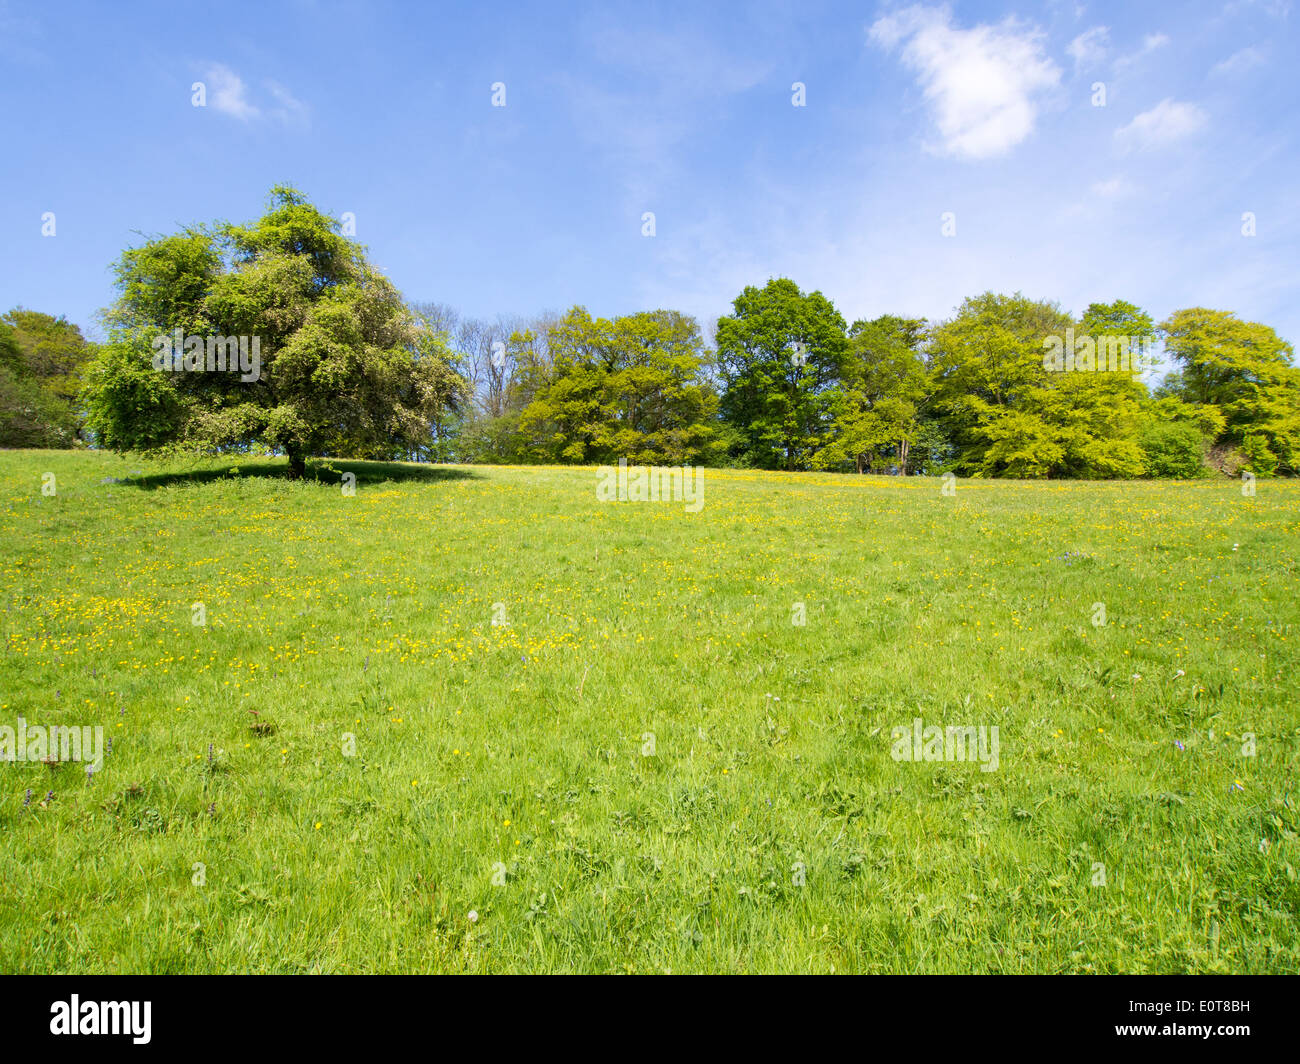 Crabapple tree in a field with other trees Stock Photo